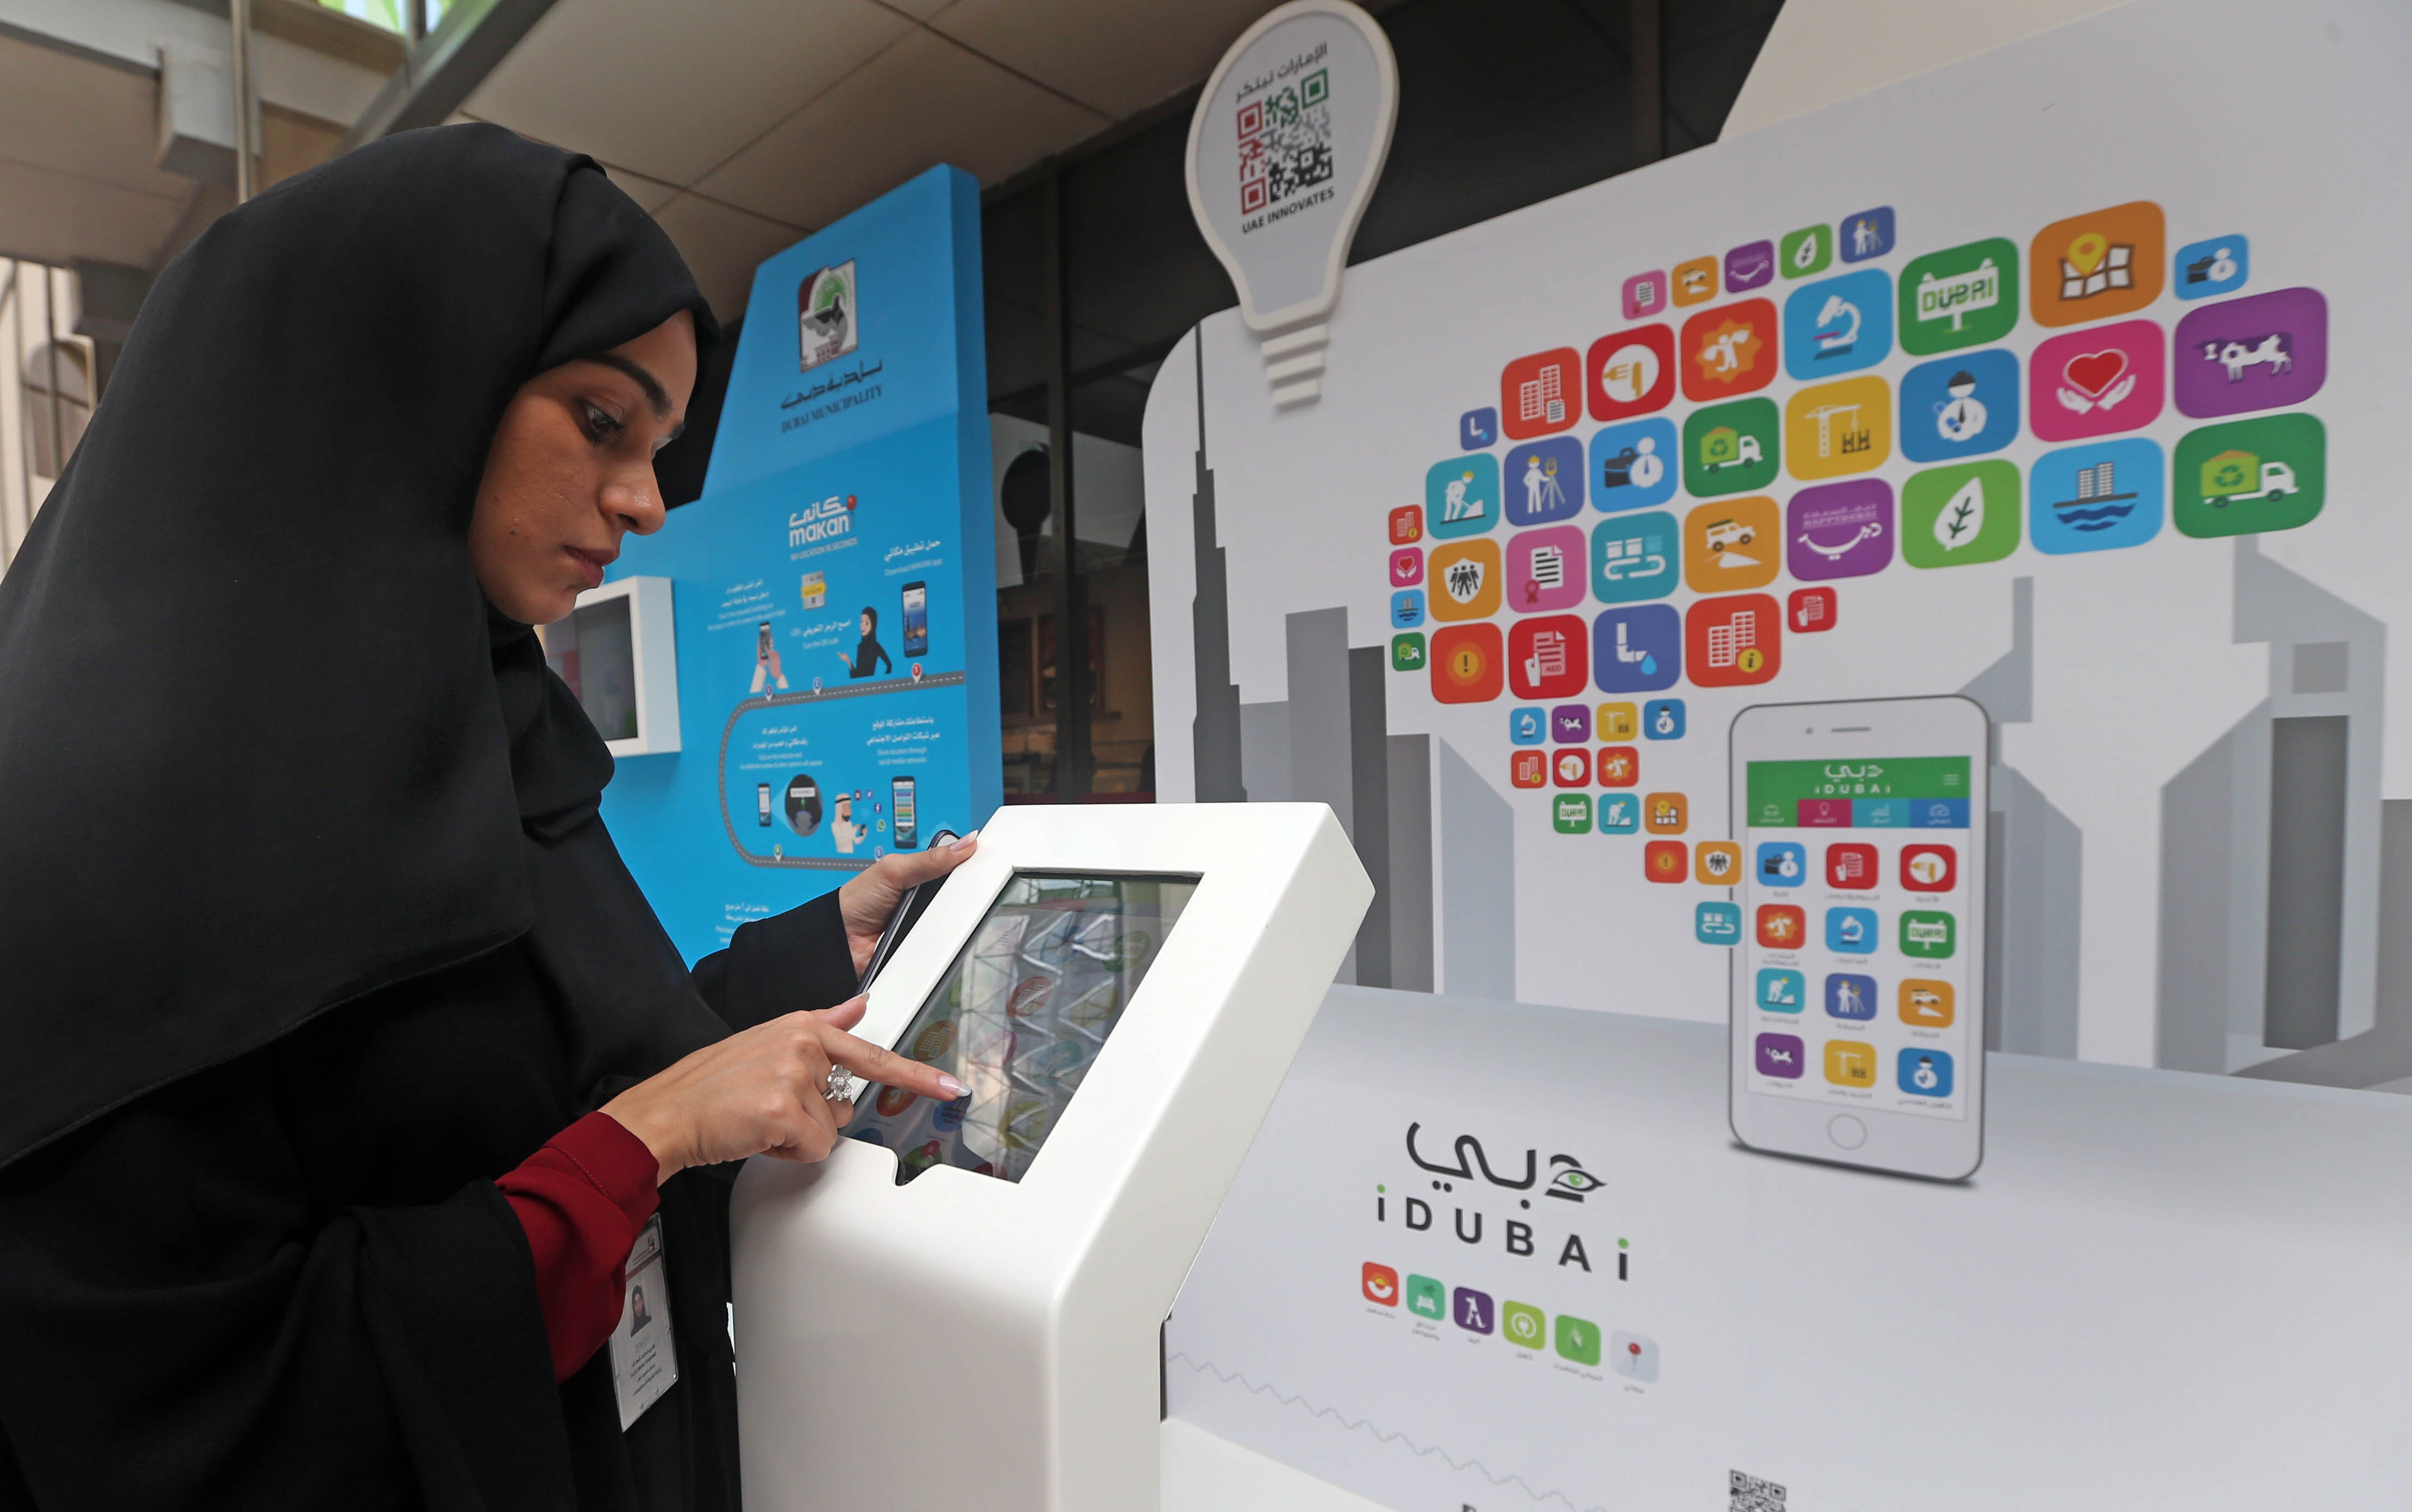 Innovation is name of the game in the UAE